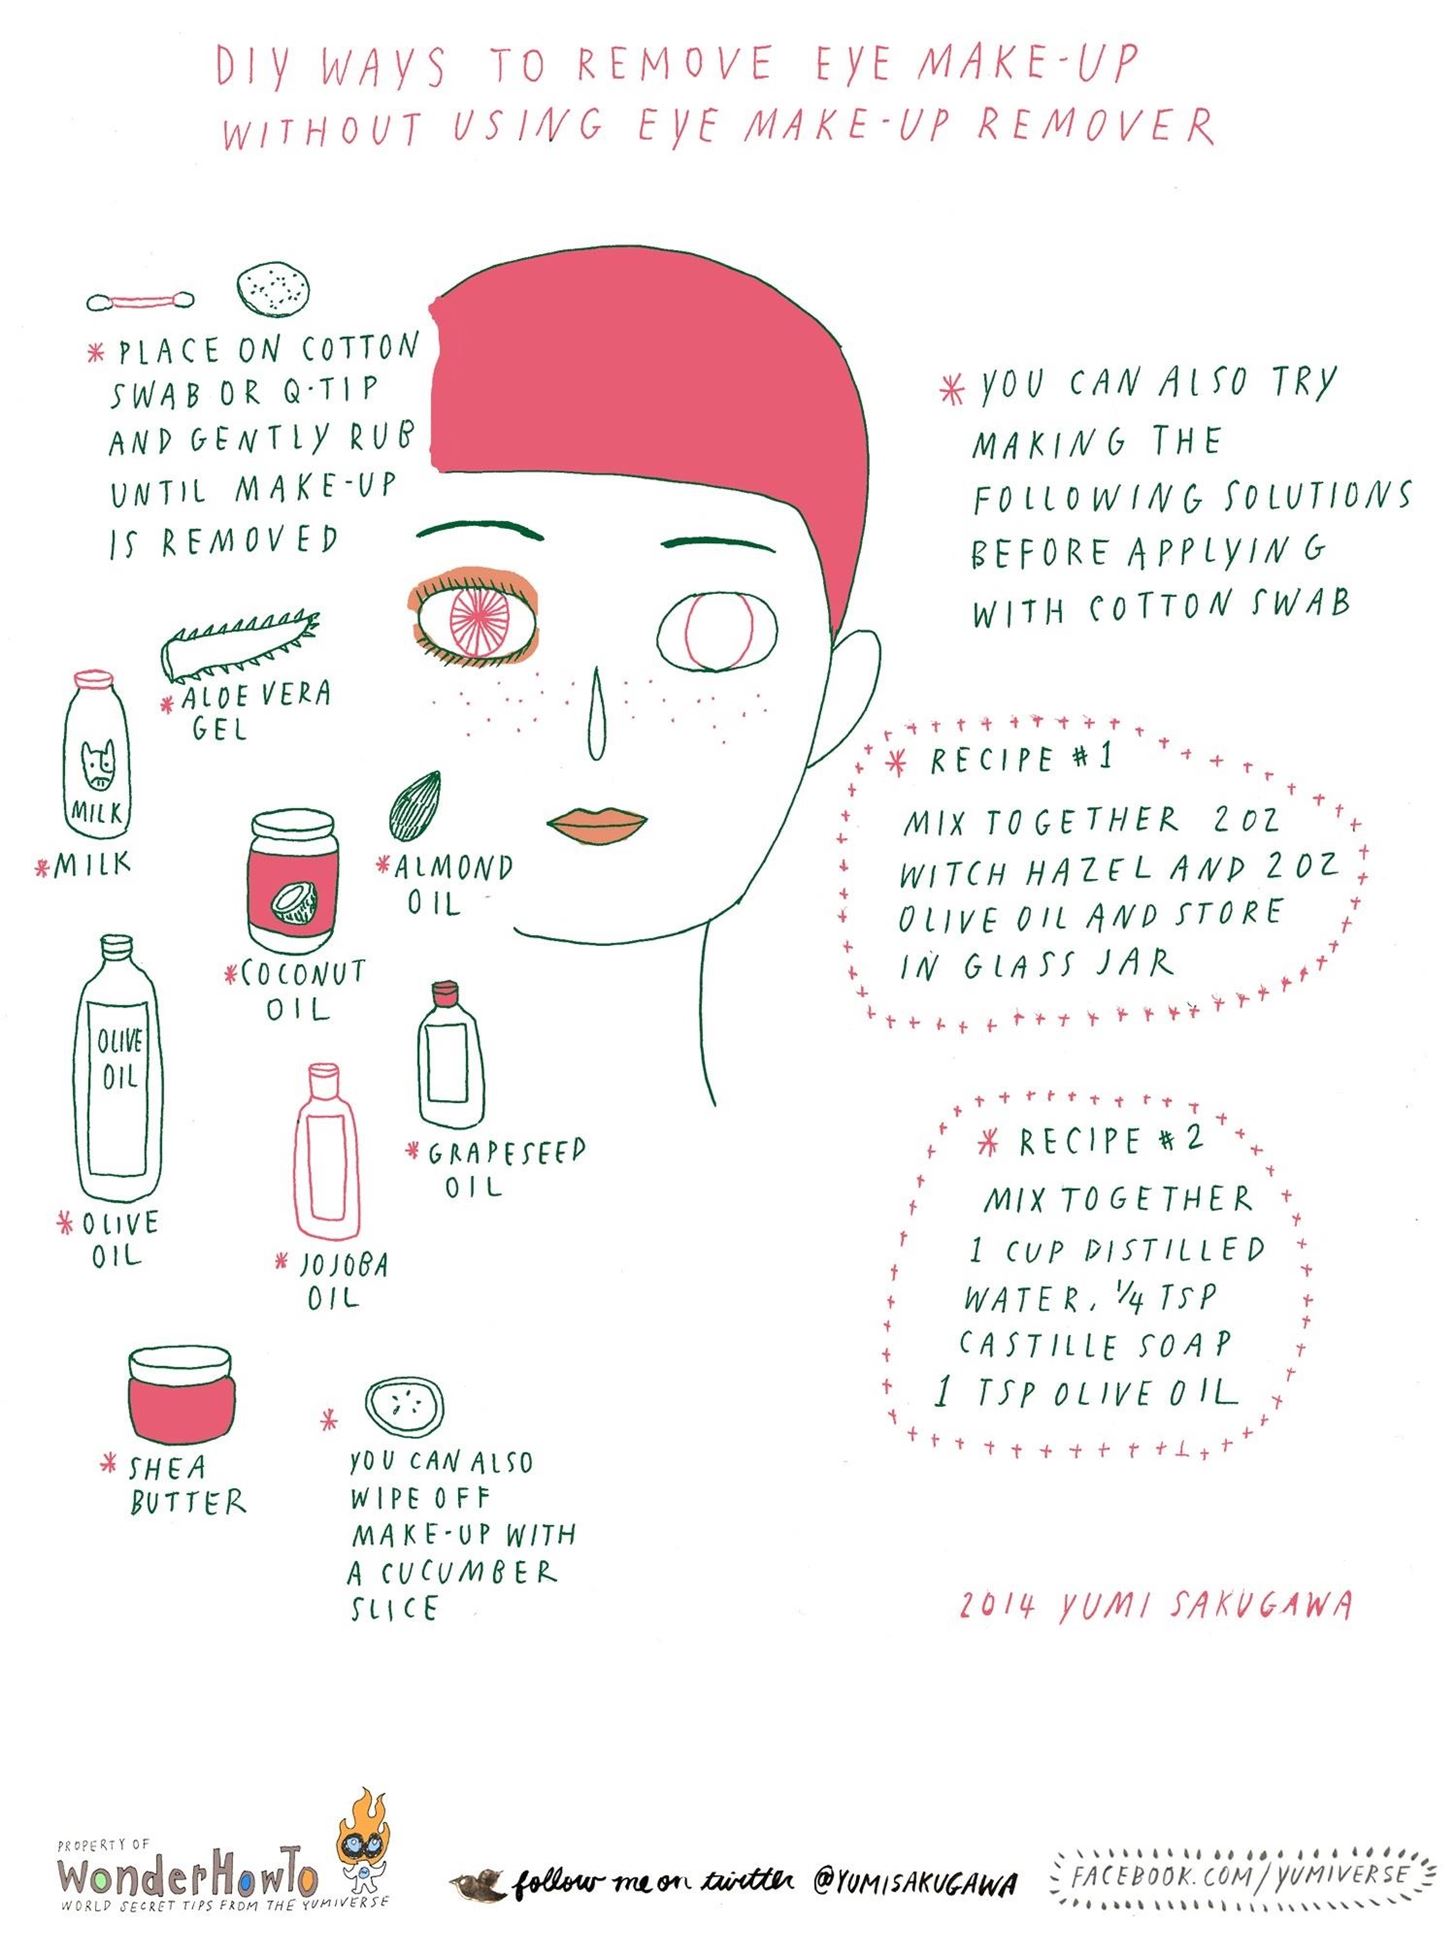 DIY Eye Makeup Remover: 11 Natural Substitutes You Probably Already Have at Home